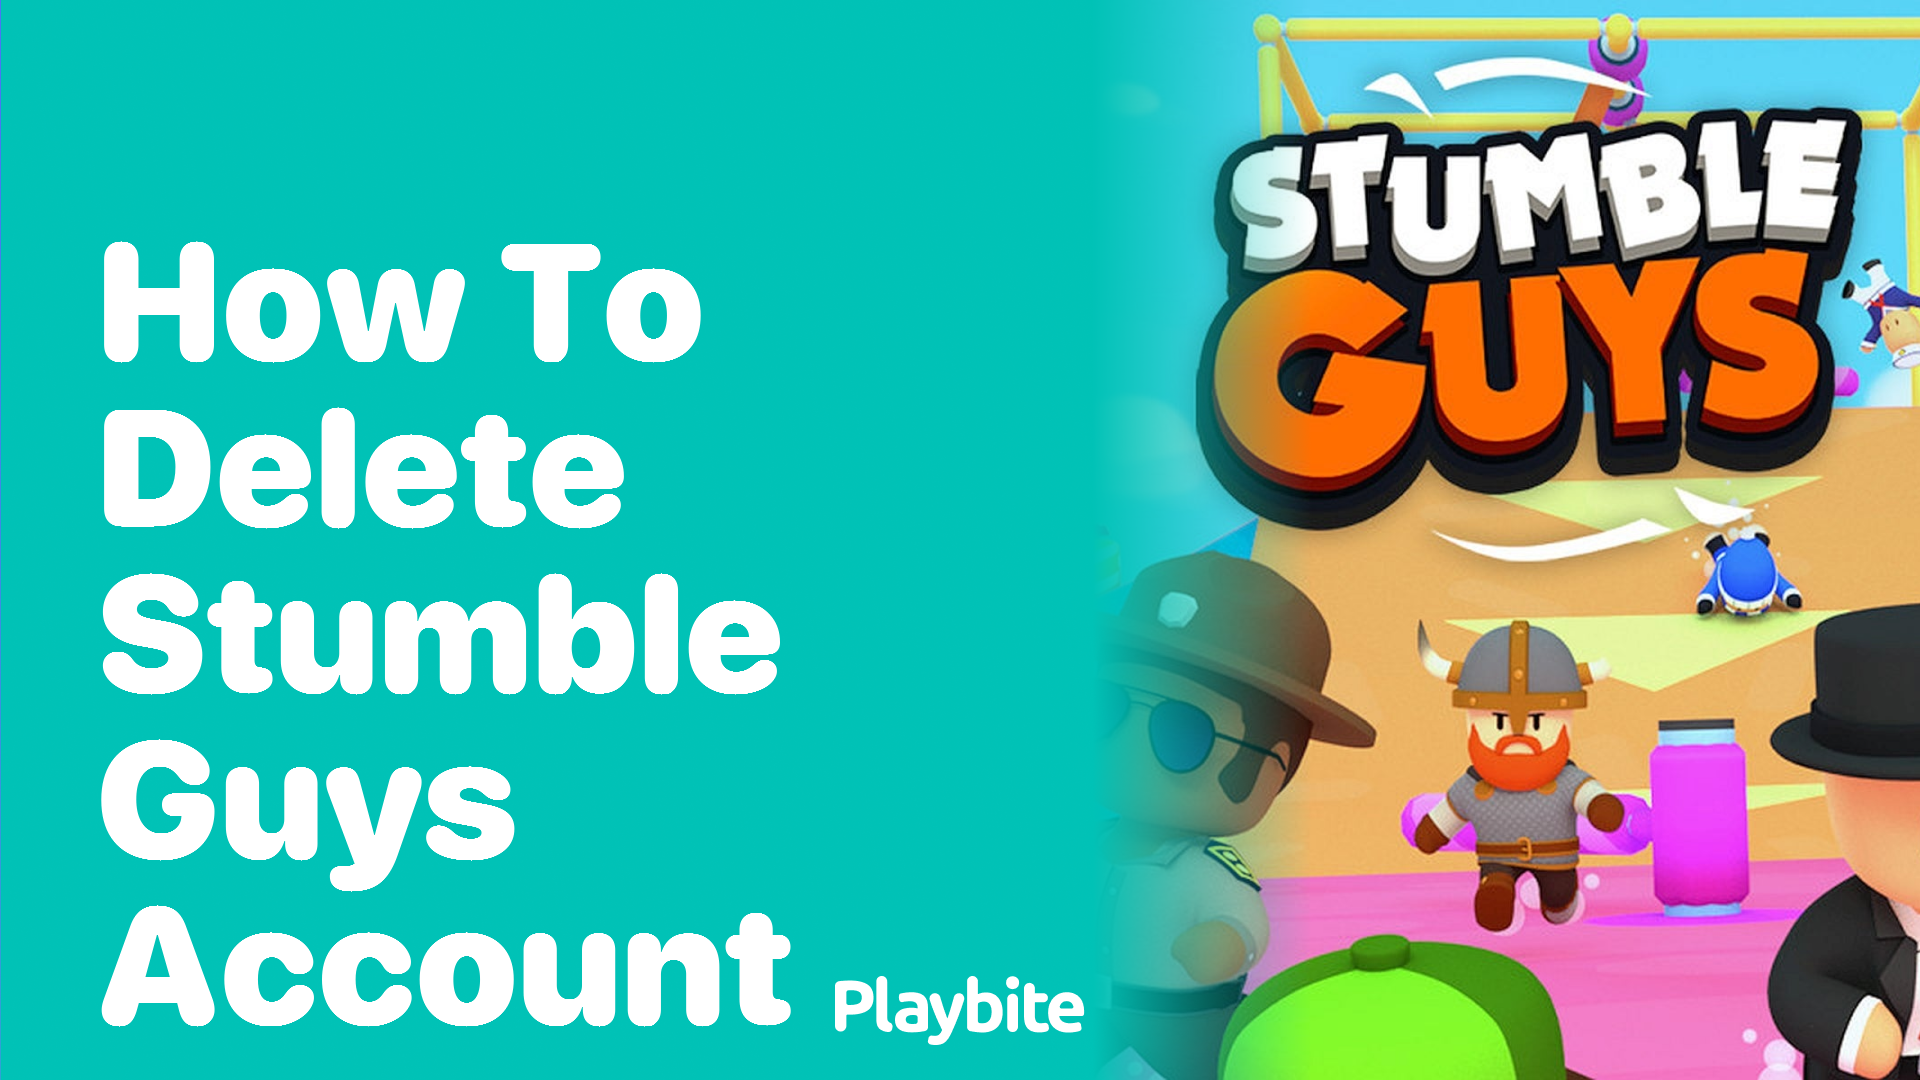 How to Delete Your Stumble Guys Account: A Step-by-Step Guide